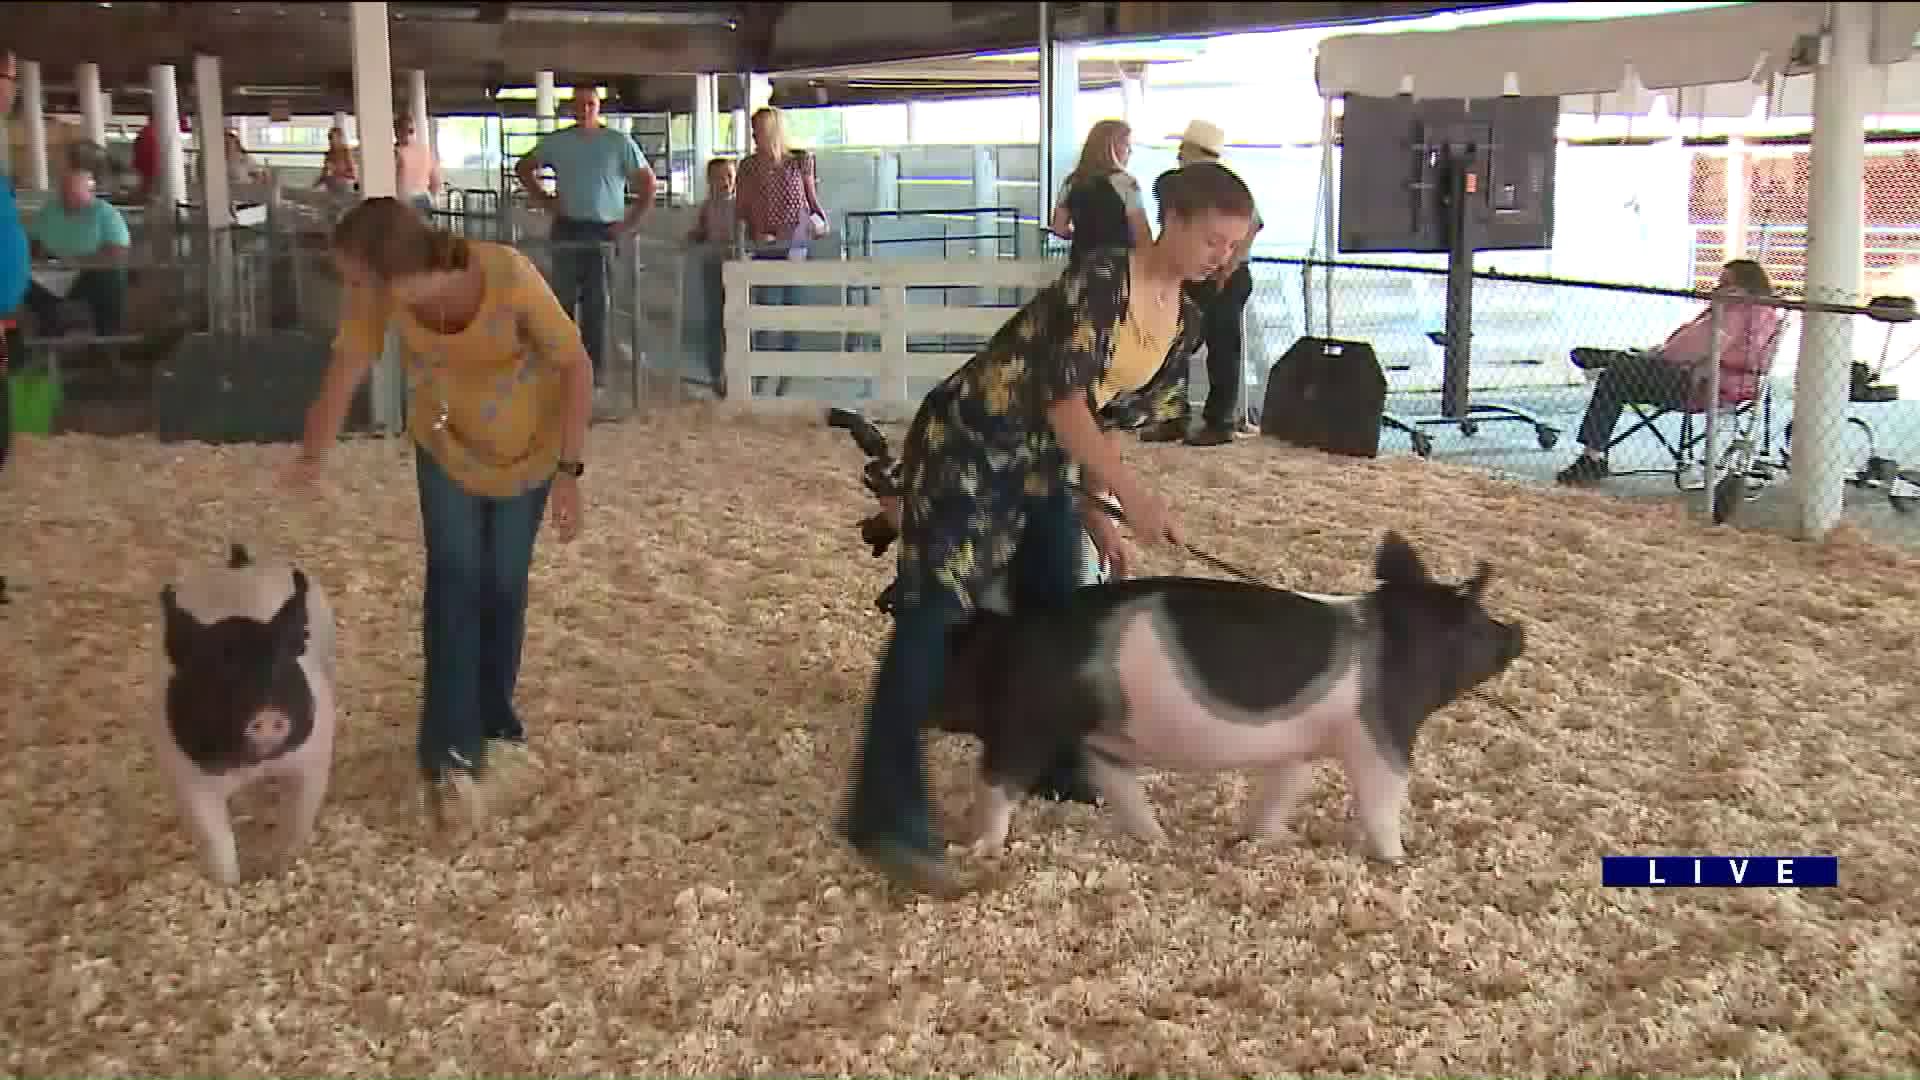 Around Town checks out the DuPage County Fair